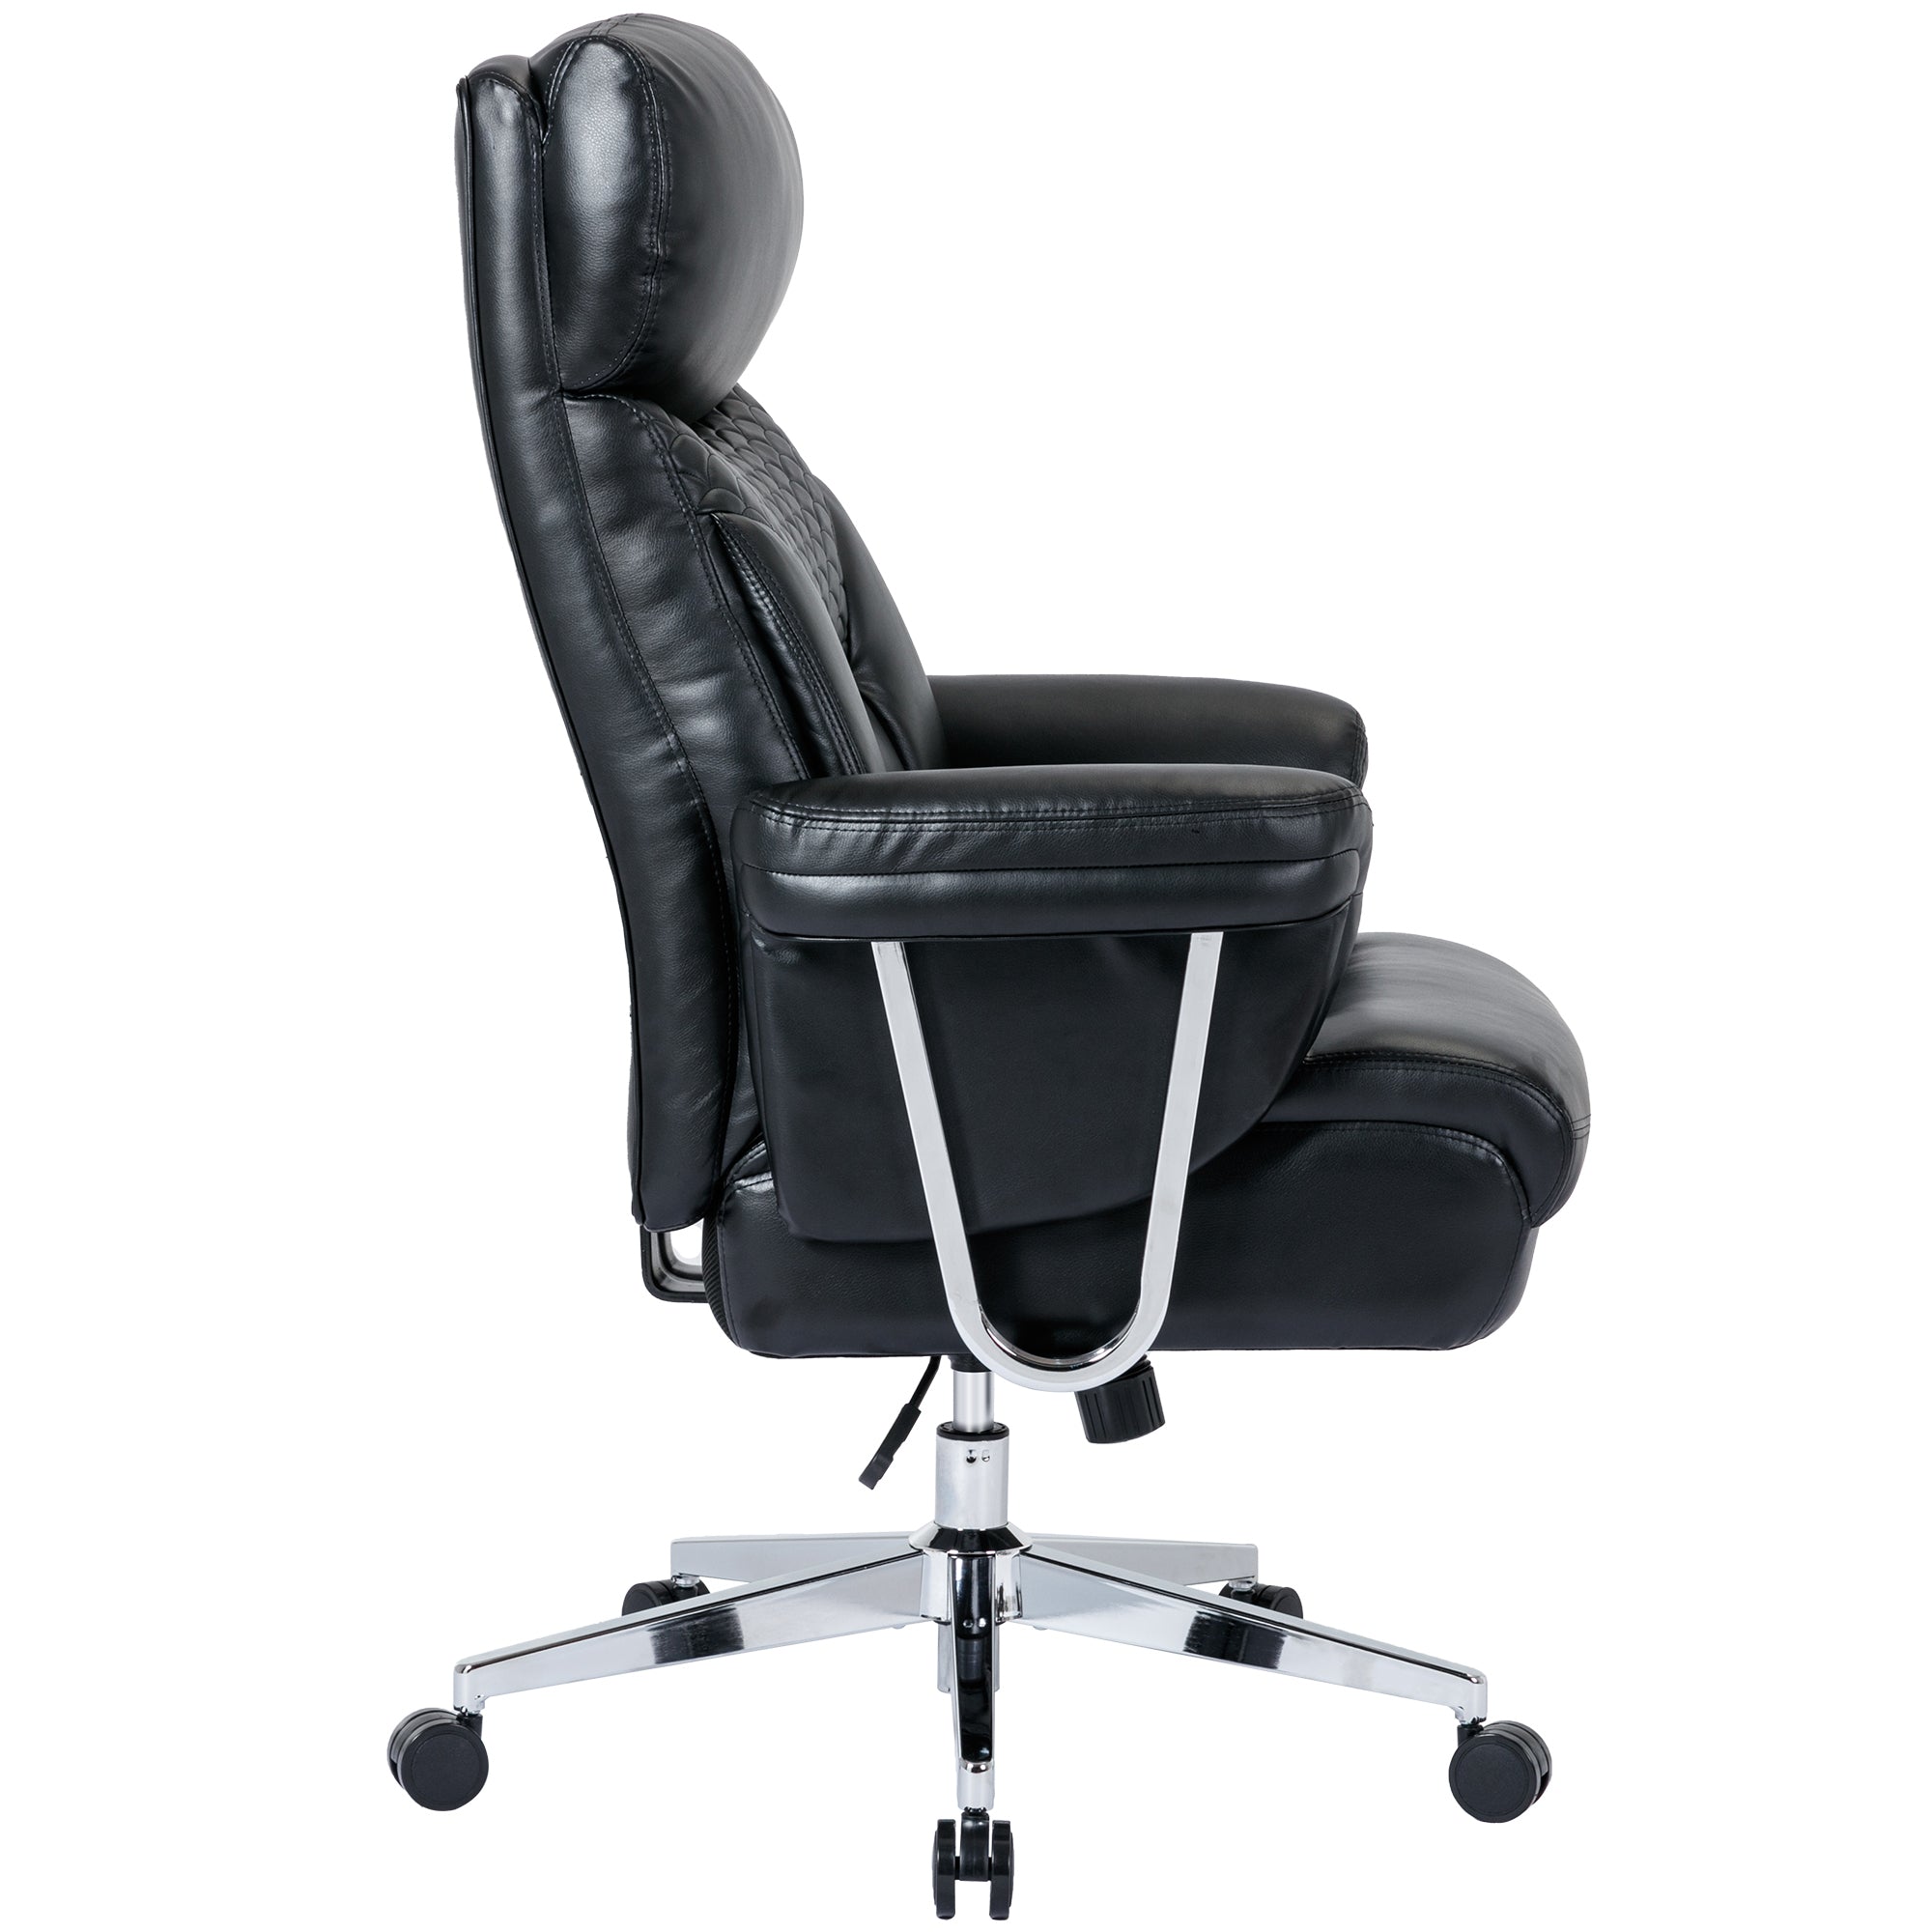 High Back Executive Office Chair 300lbs-Ergonomic Leather Computer Desk Chair - Black